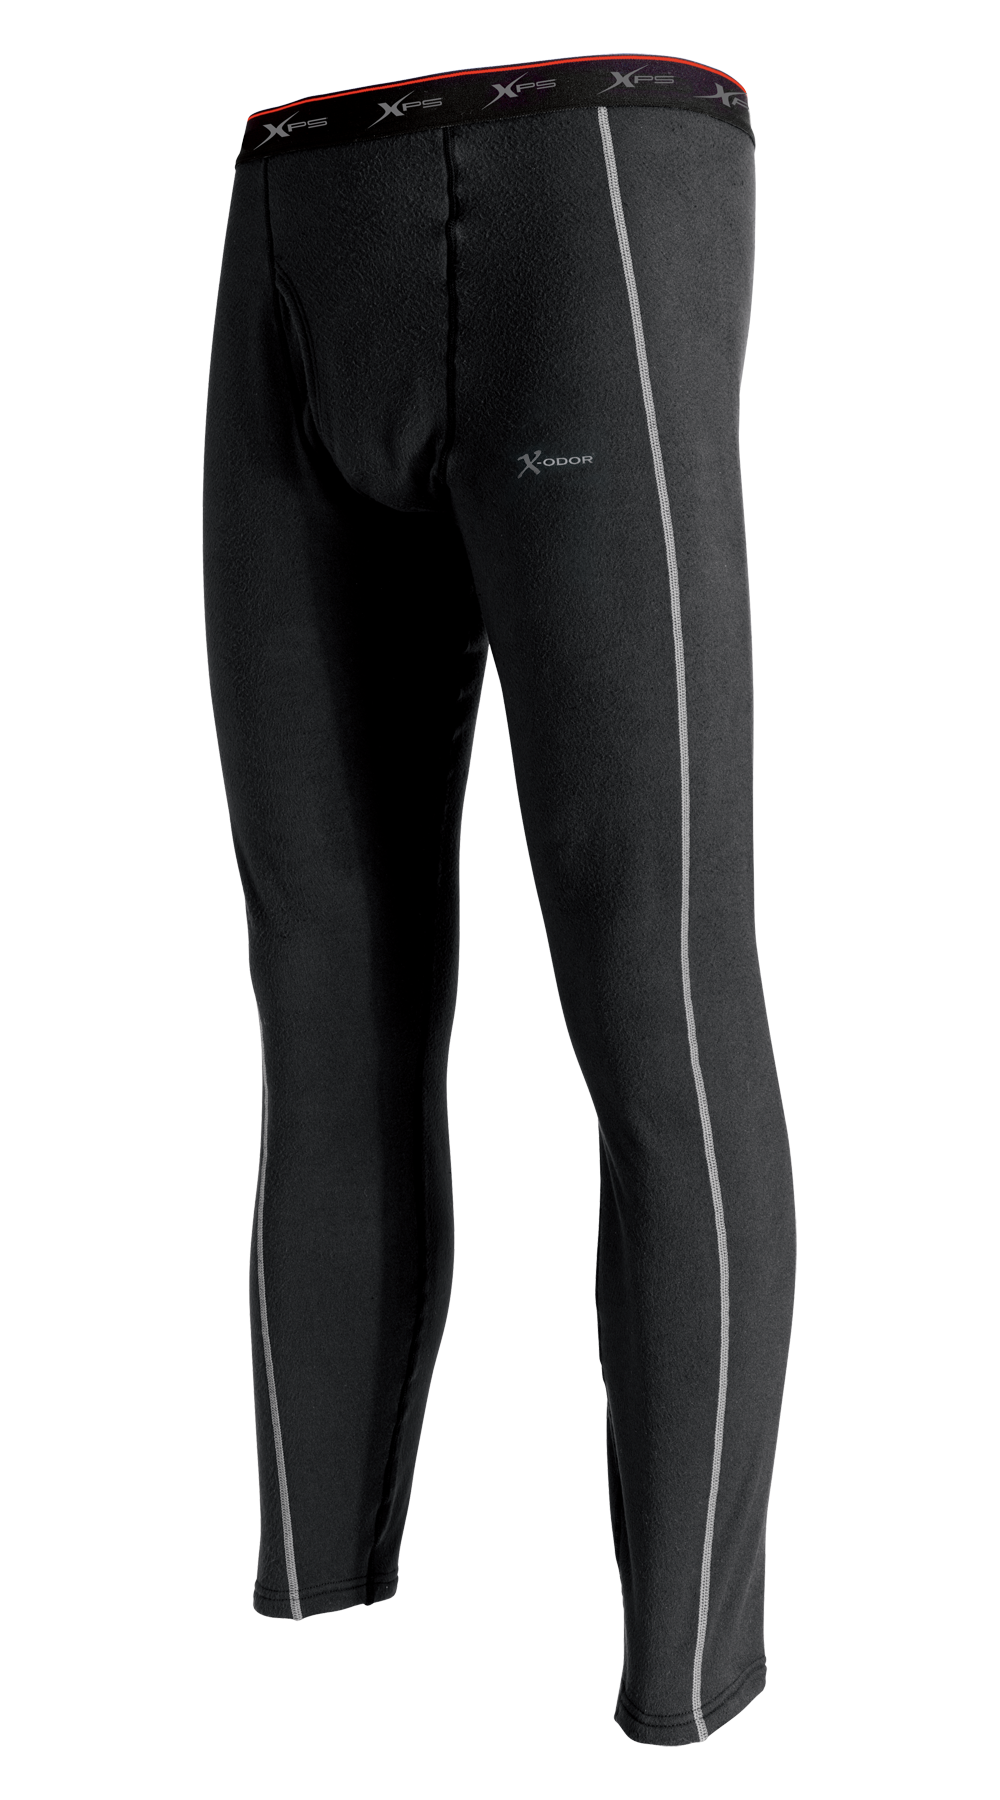 XPS Expedition Weight 3.0 Thermal Pants with X-Odor for Men